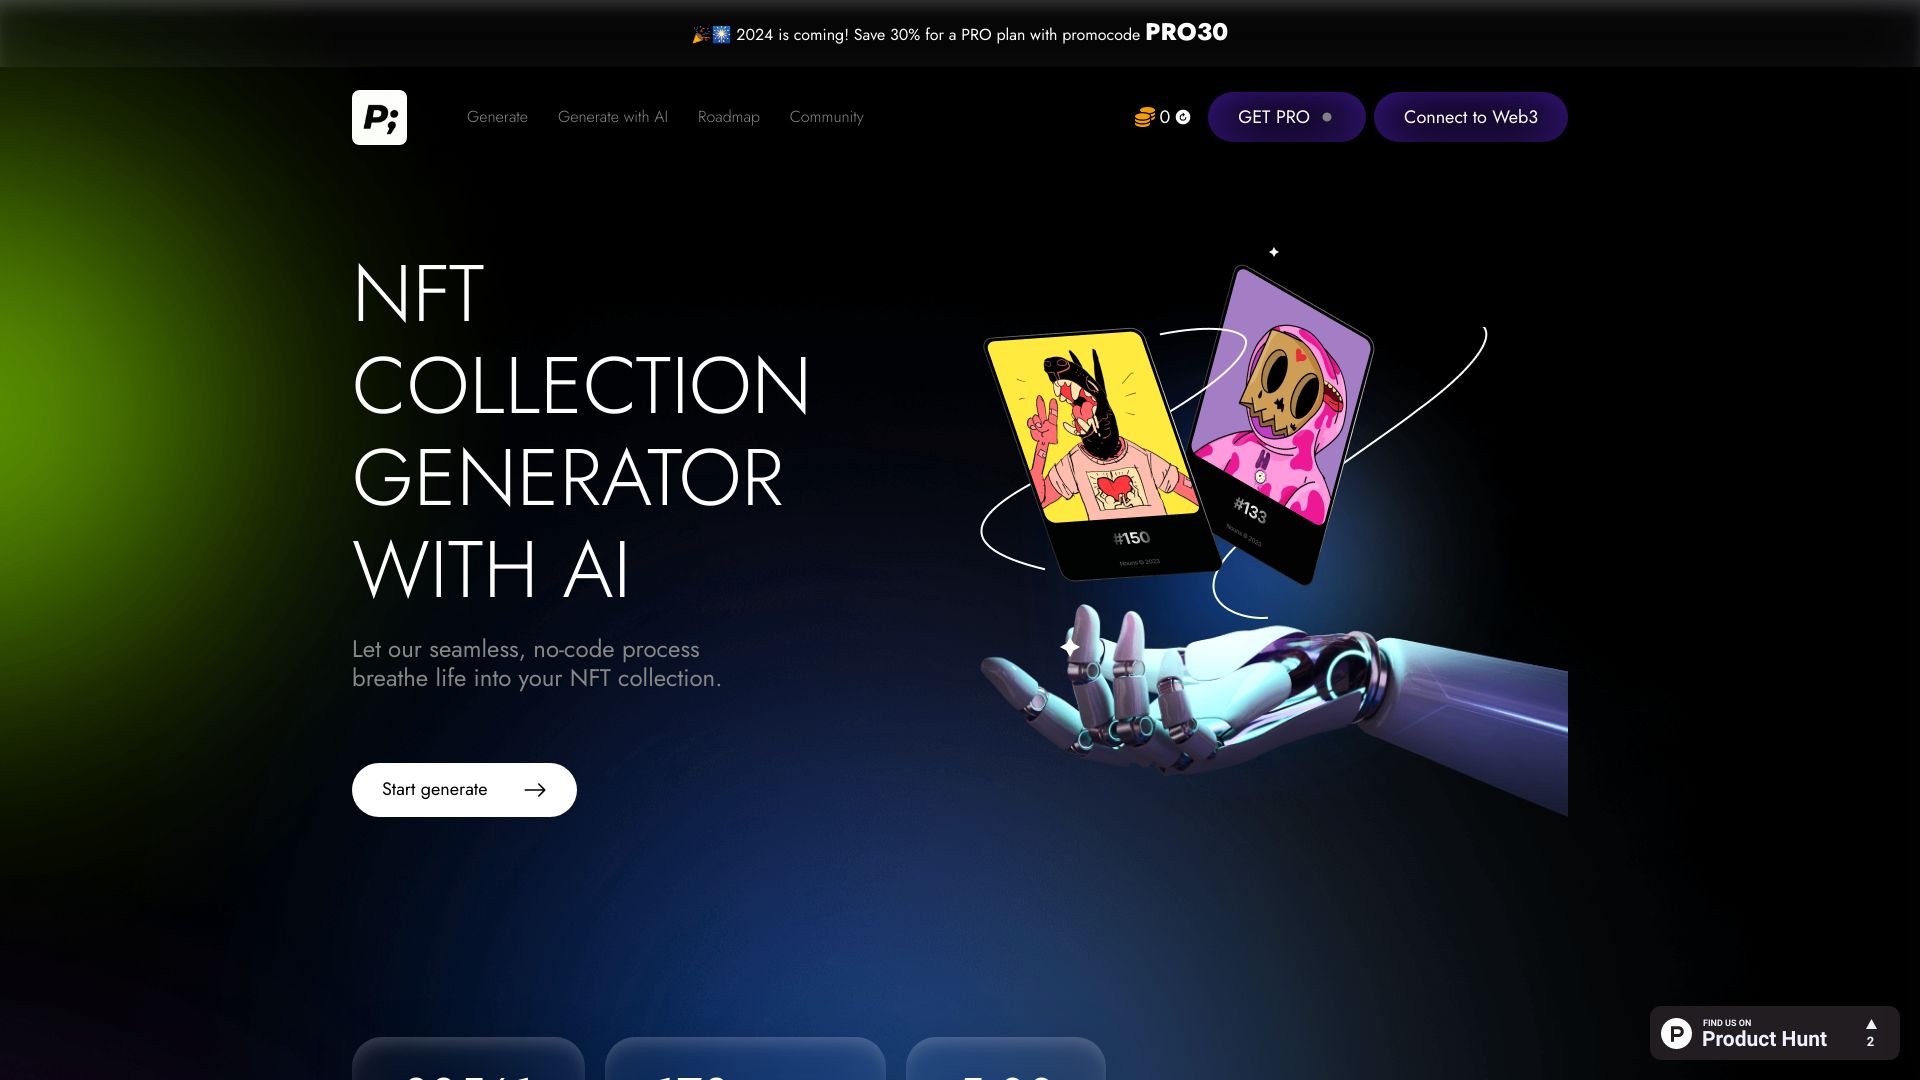 NFT Collection Generator with AI